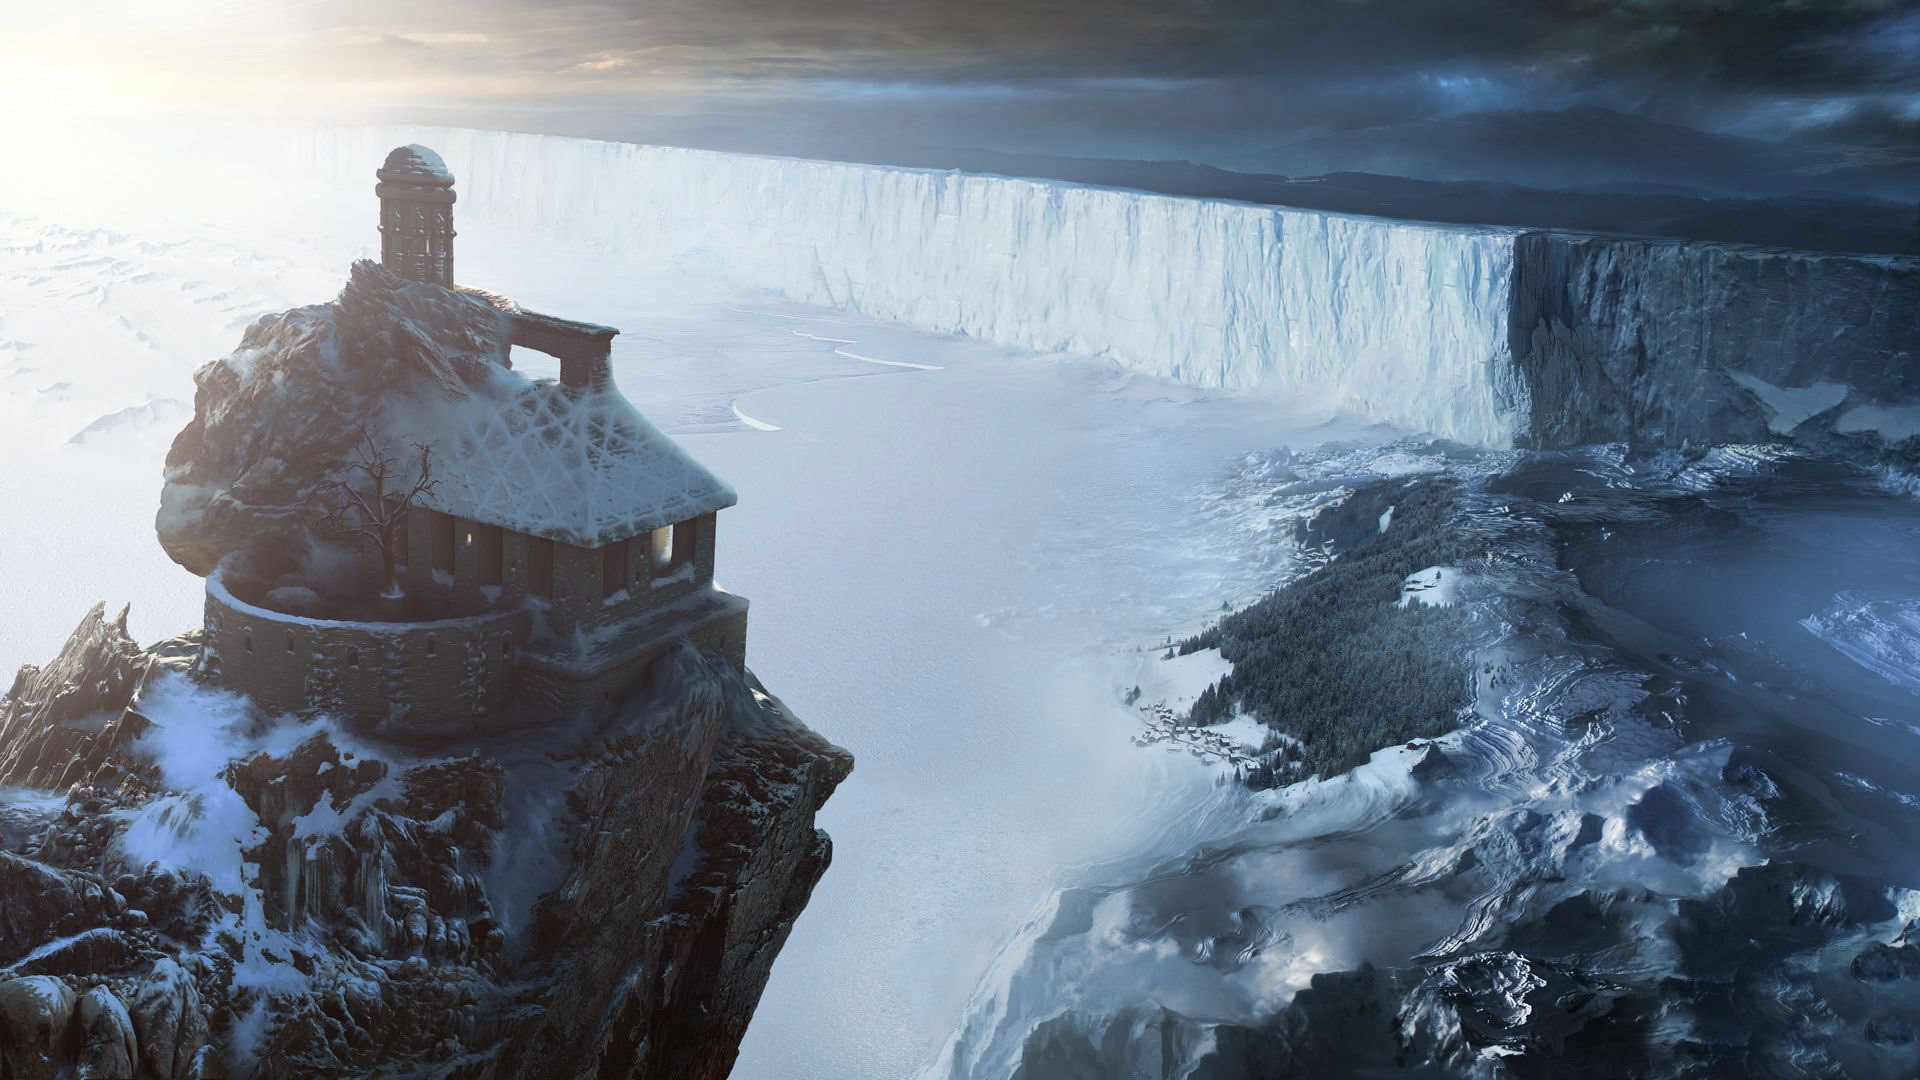 Game of Thrones wallpaper 1920x1080 ·① Download free cool ...